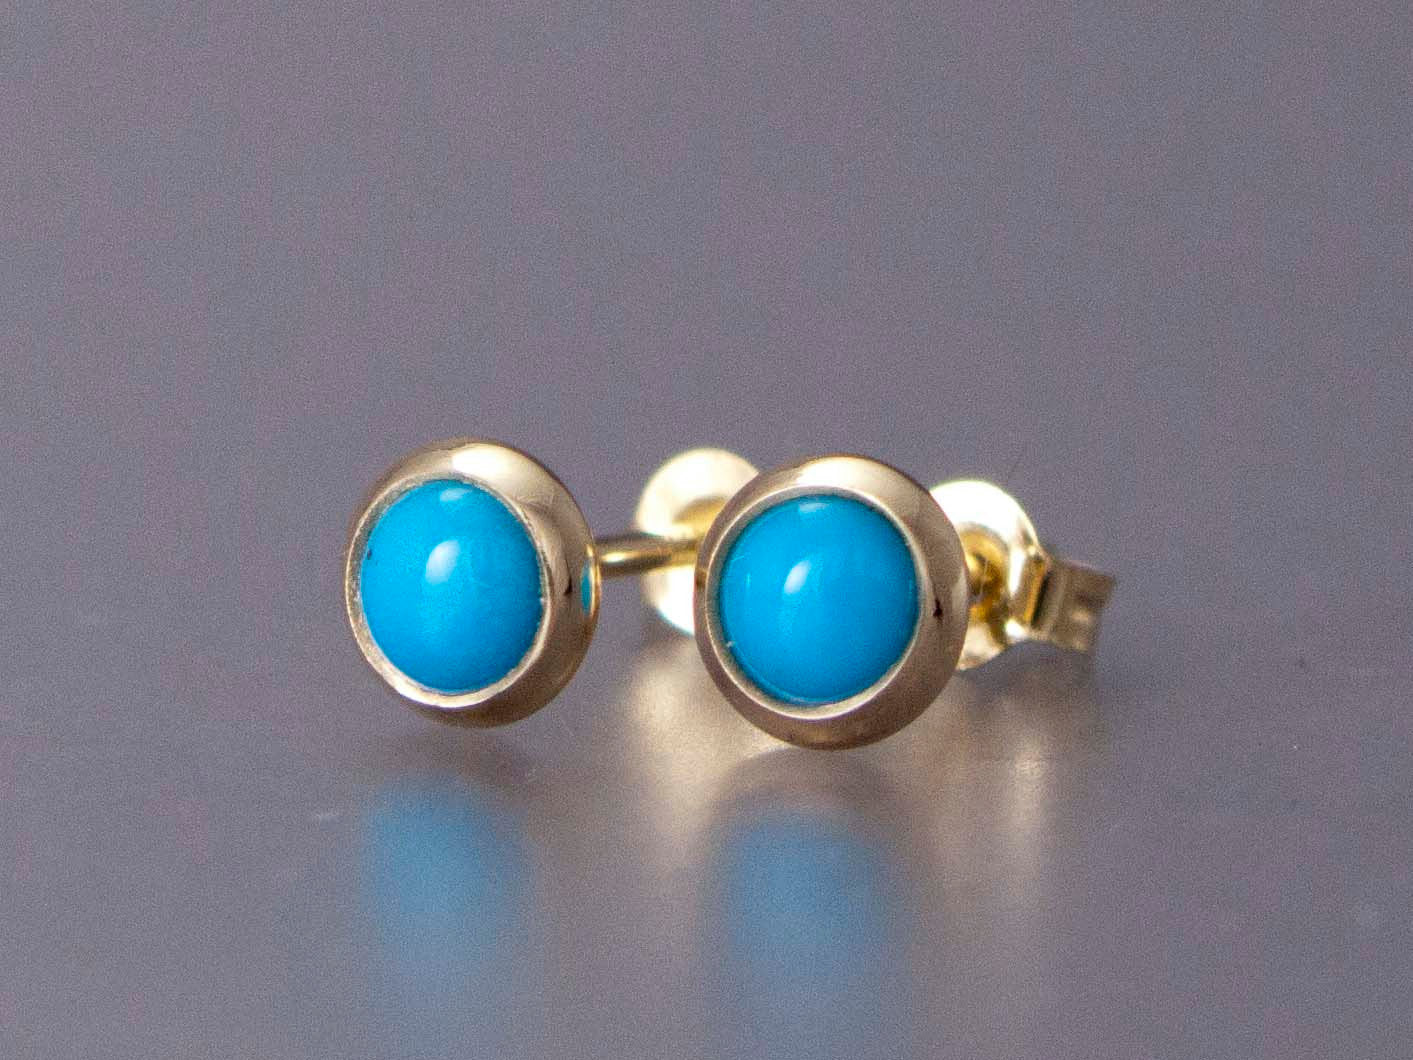 Small Turquoise 14k Gold Studs - 4mm round cabochon bezel earrings